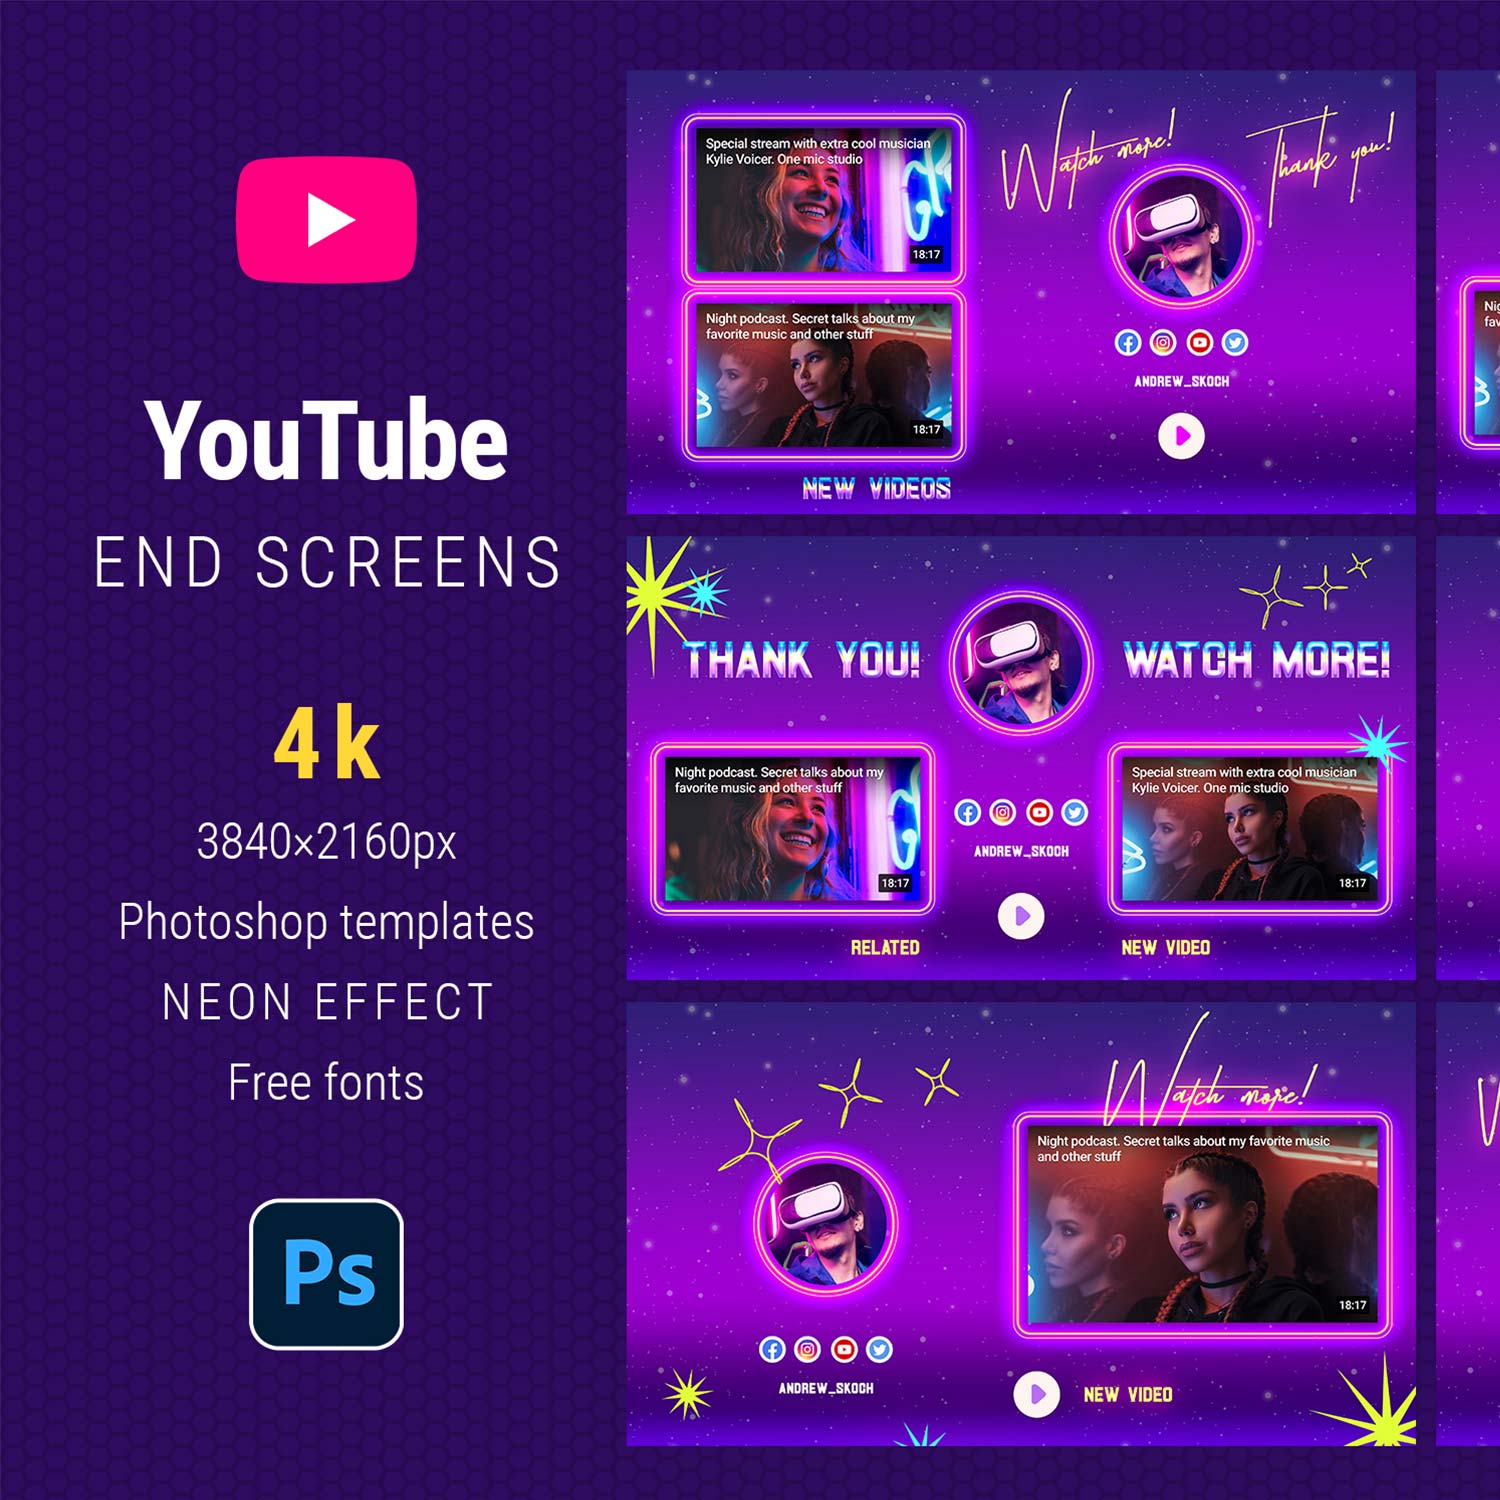 YouTube End Screens cover image.